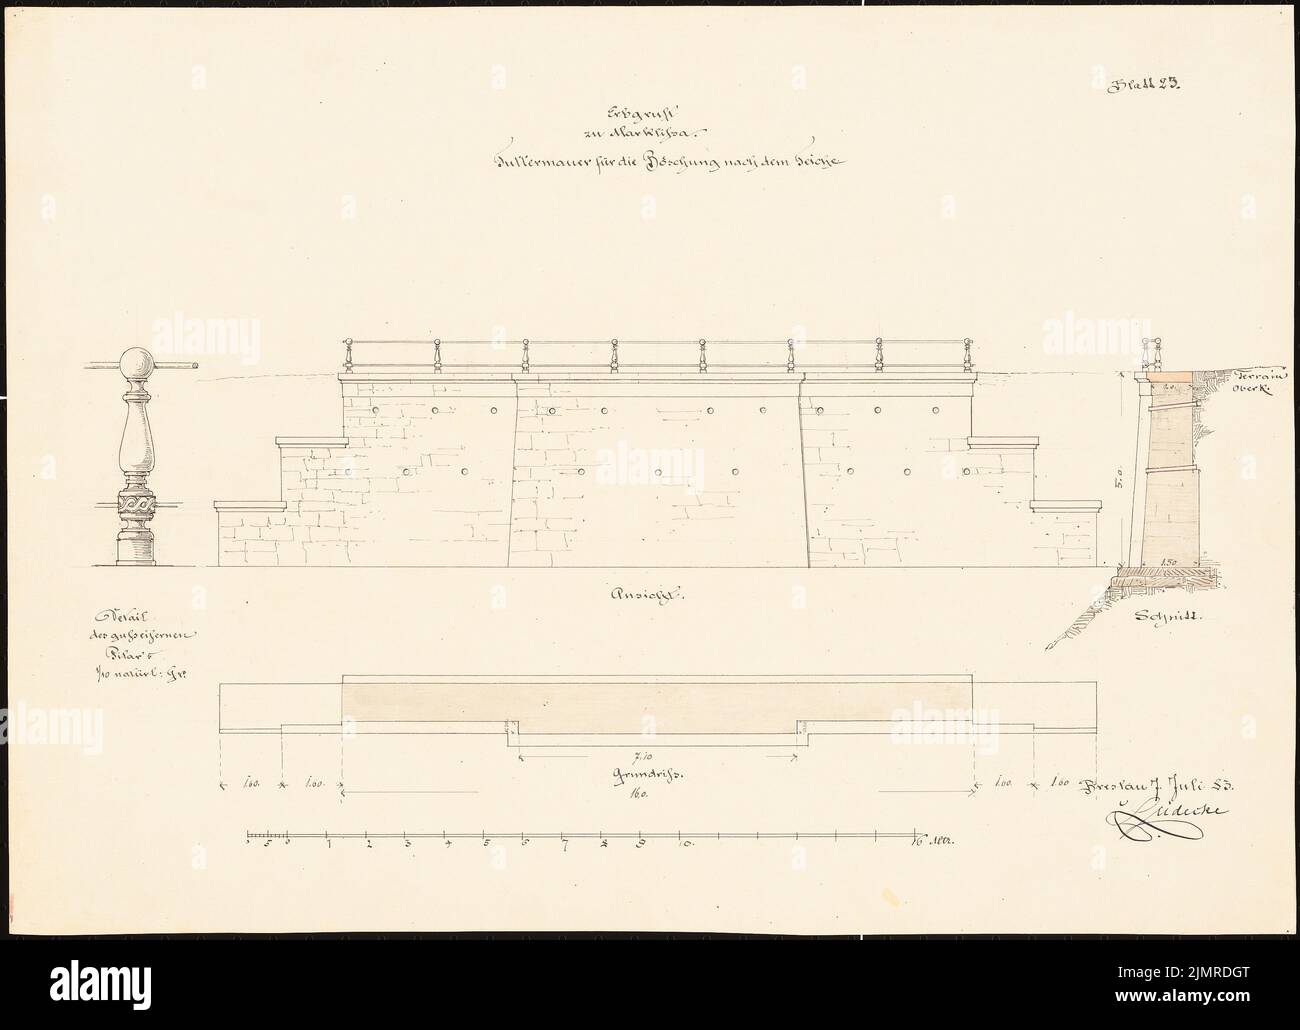 Lüdecke Carl Johann Bogislaw (1826-1894), hereditary crypt Woller in Marklissa (07.07.1883): View, floor plan and cut the feed wall for the embankment to the pond, detail of the cast iron pilar, scale bar. Tusche watercolor on the box, 36.4 x 50.3 cm (including scan edges) Lüdecke Carl Johann Bogislaw  (1826-1894): Erbgruft Woller, Marklissa Stock Photo